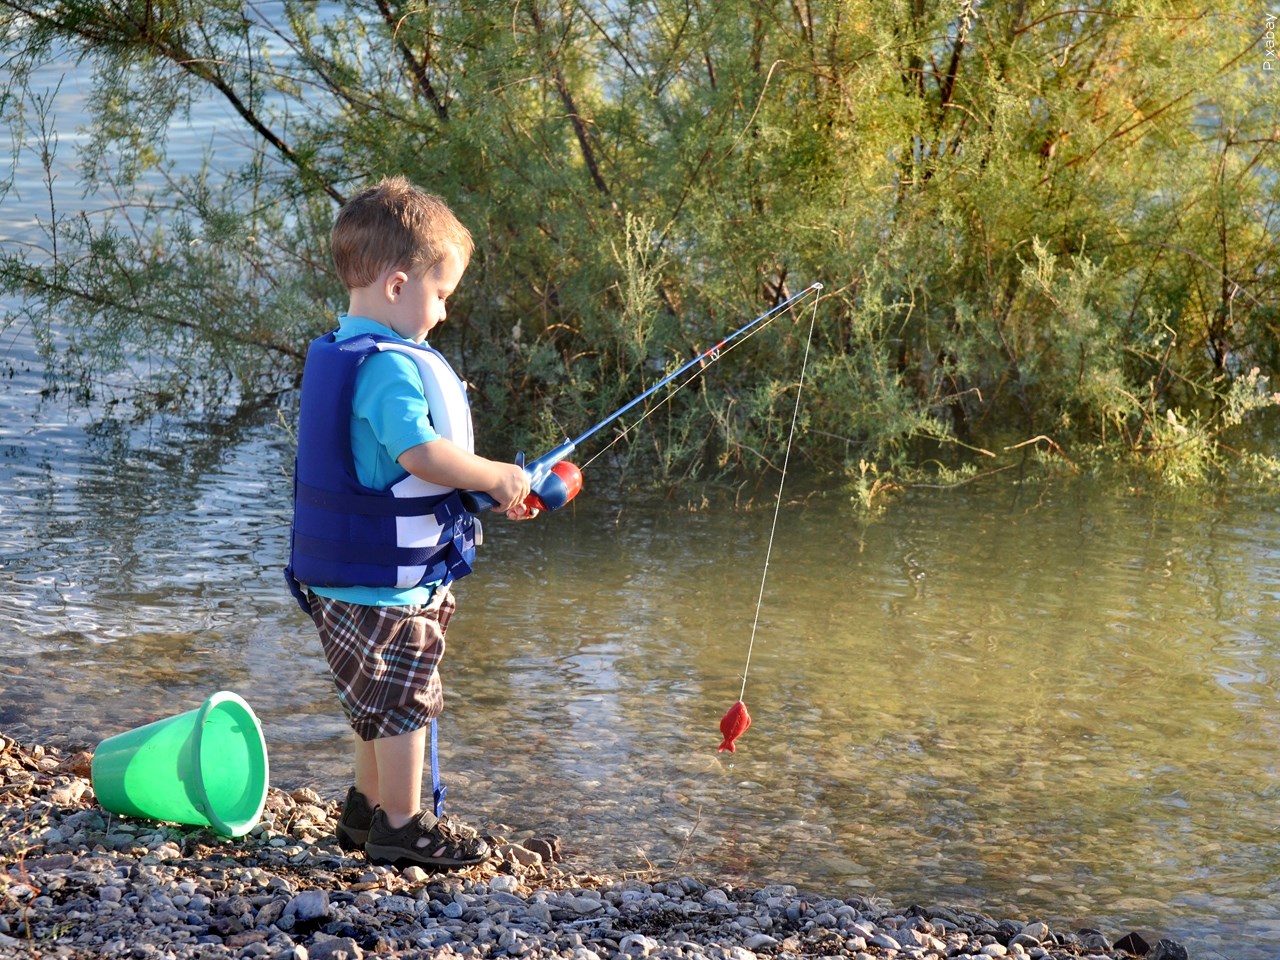 The 100 to host annual Kids' Fishing Derby